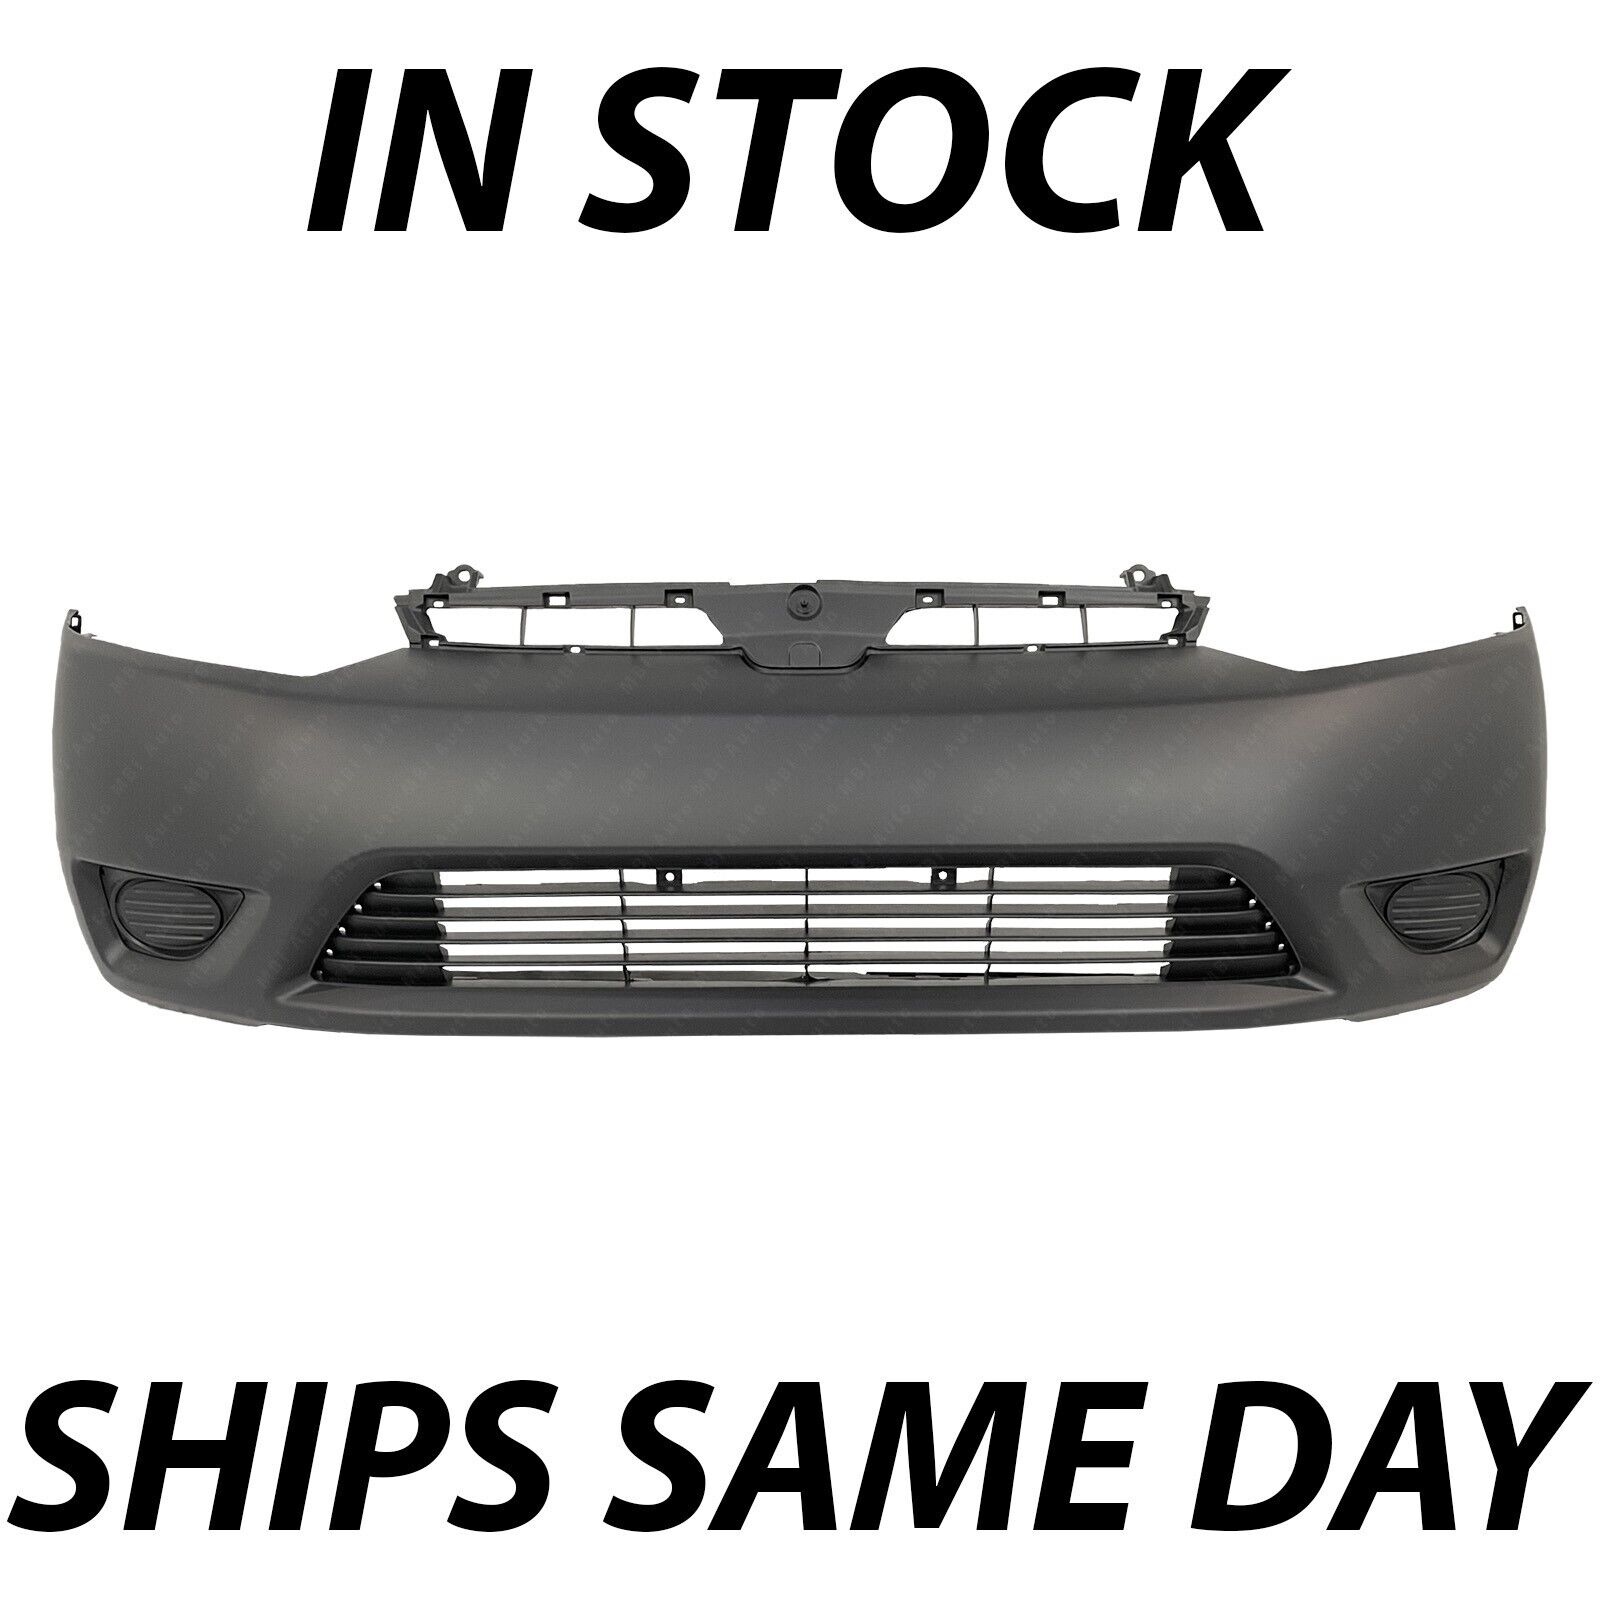 NEW Primered -- Front Bumper Cover Fascia for 2006 2007 2008 Honda Civic Coupe